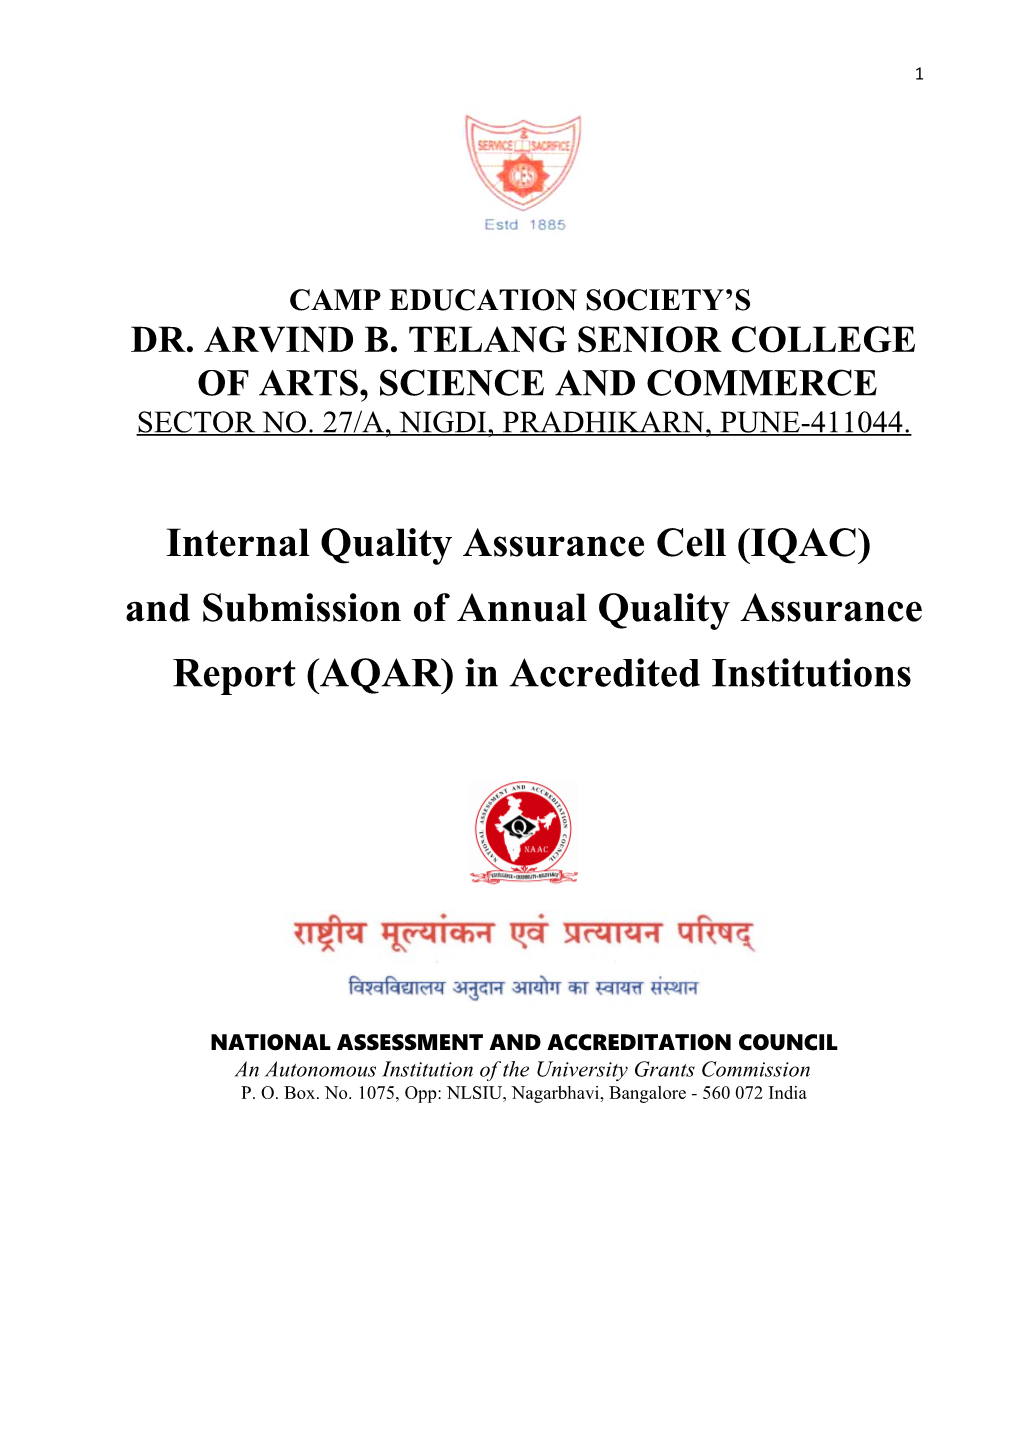 Dr. Arvind B. Telang Senior College of Arts, Science and Commerce